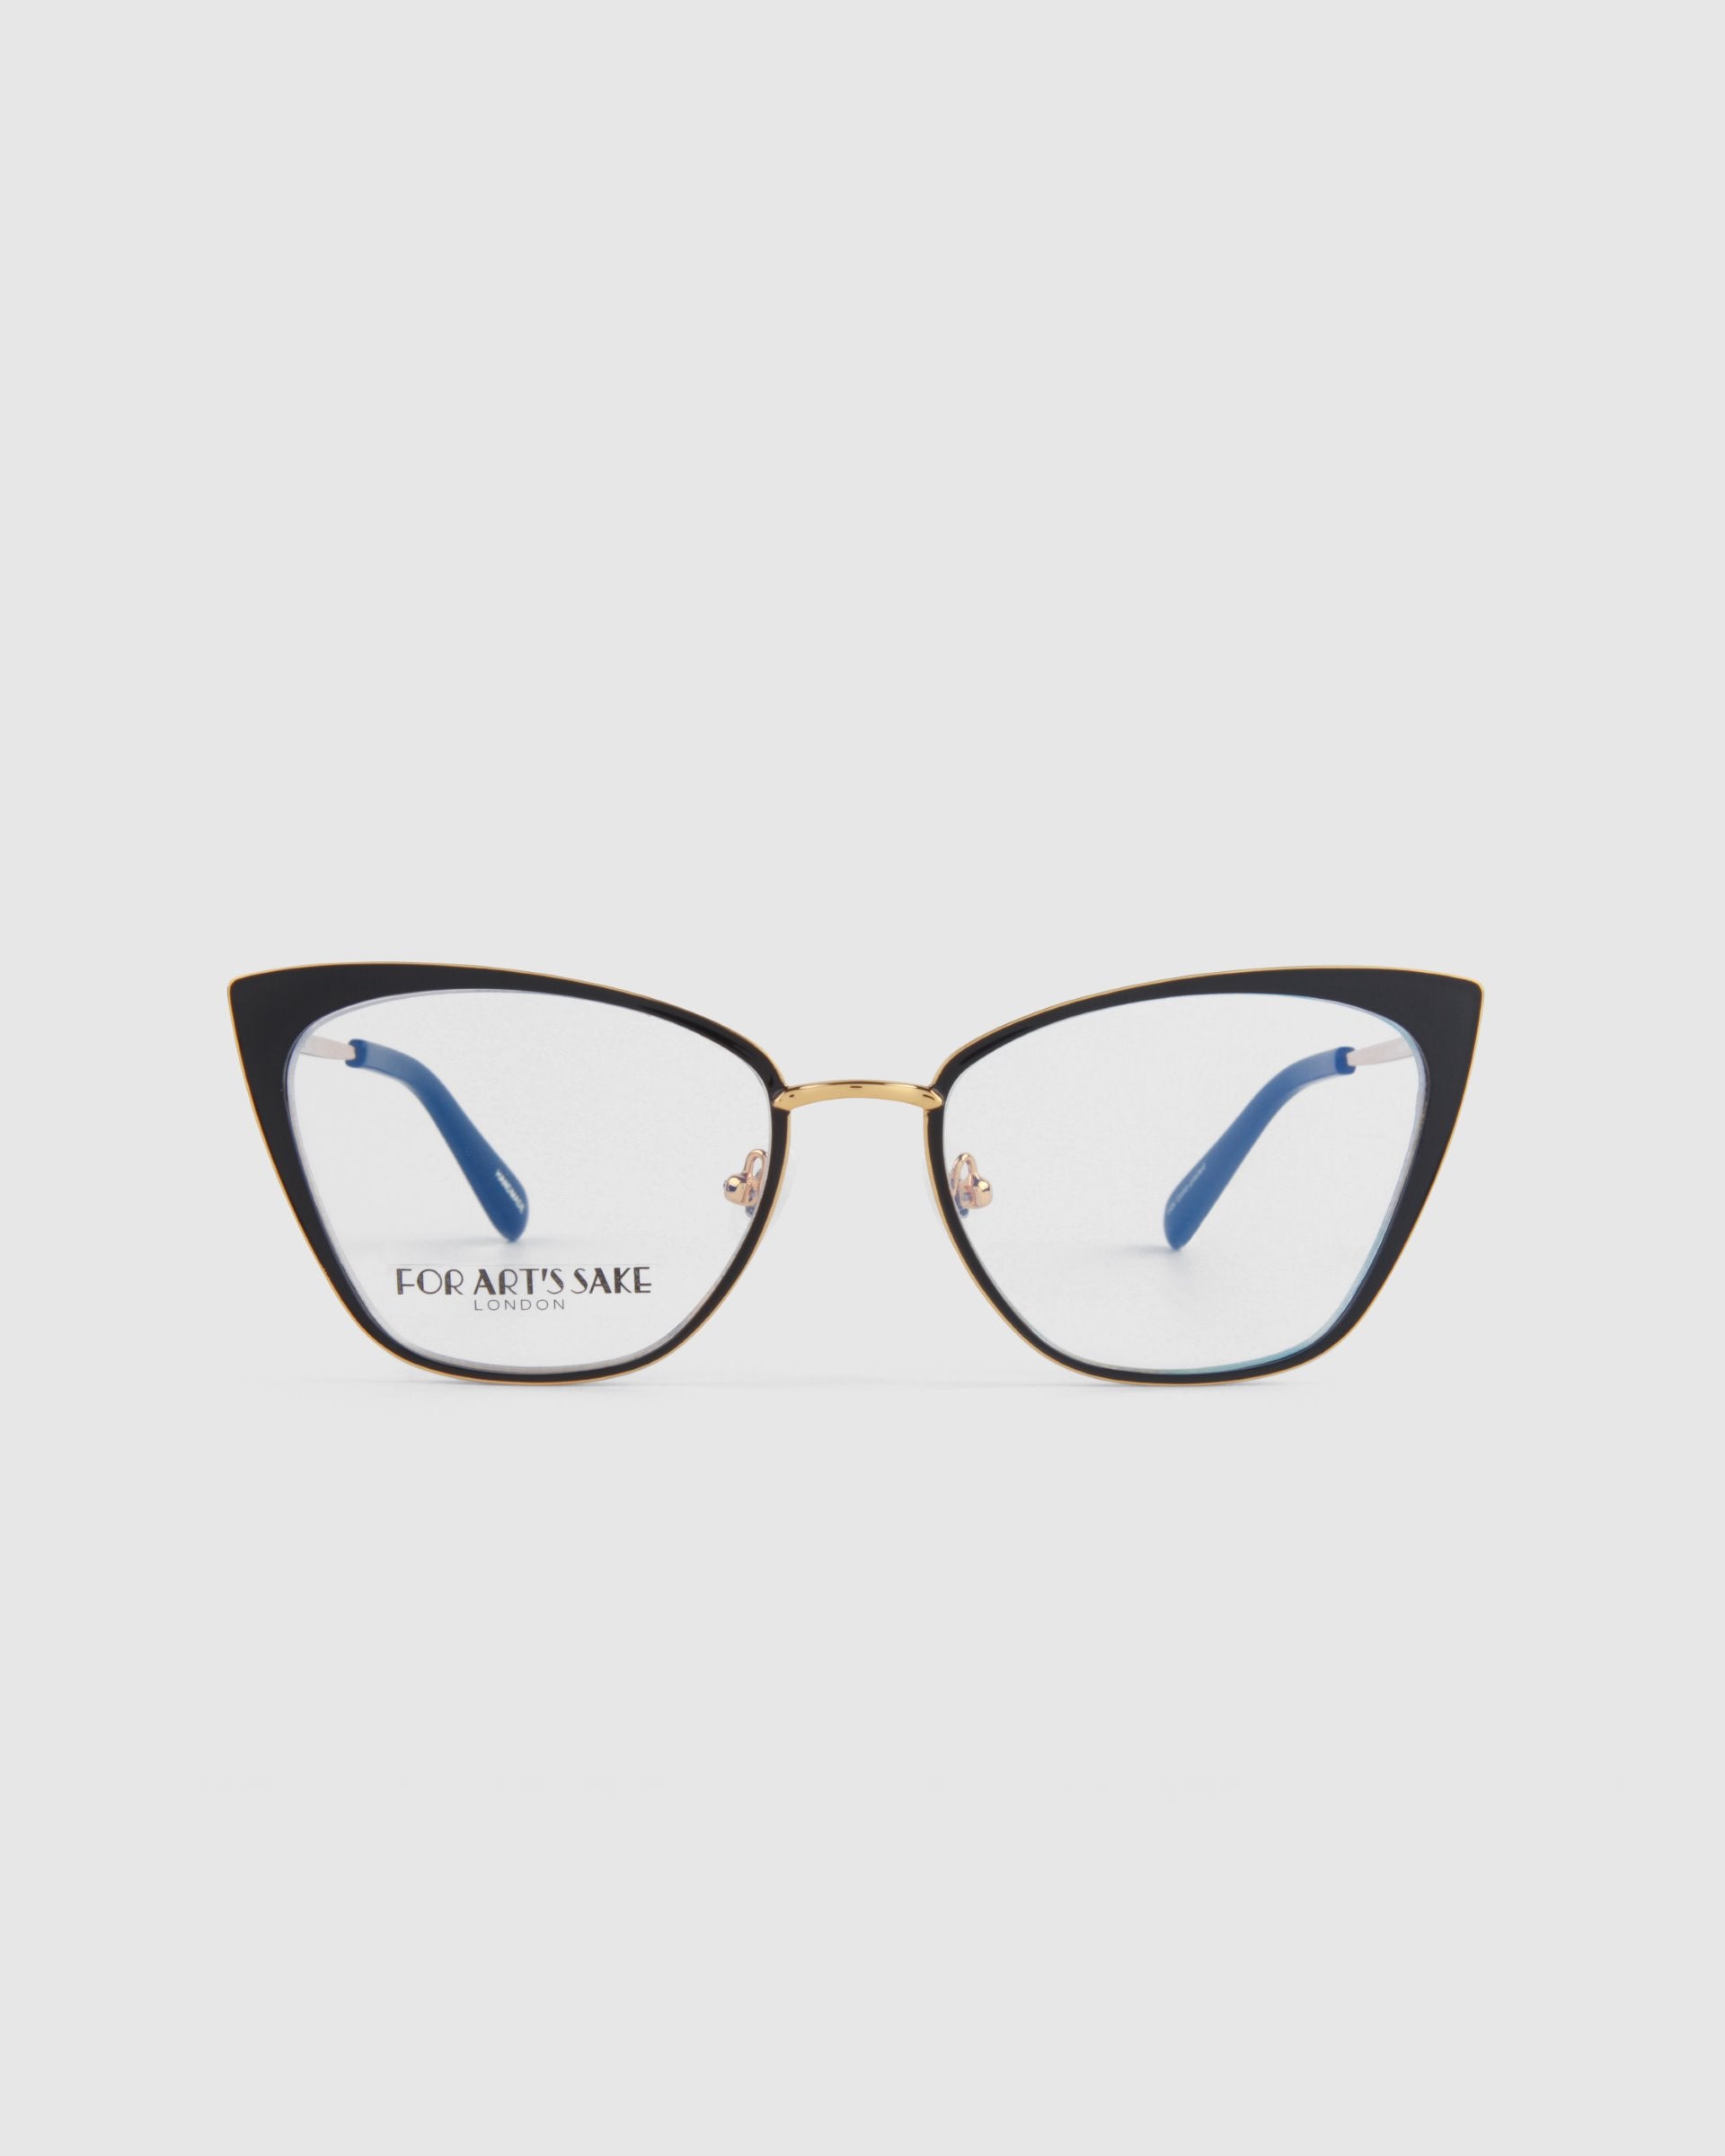 A pair of For Art's Sake® Stella Two stylish cat-eye glasses with black and 14kt gold-plated frames. The temples have a sleek design with blue ear tips. The lenses are clear and equipped with Blue Light Filter, and the words "FOR ART'S SAKE" are printed on the left lens. The background is plain white.